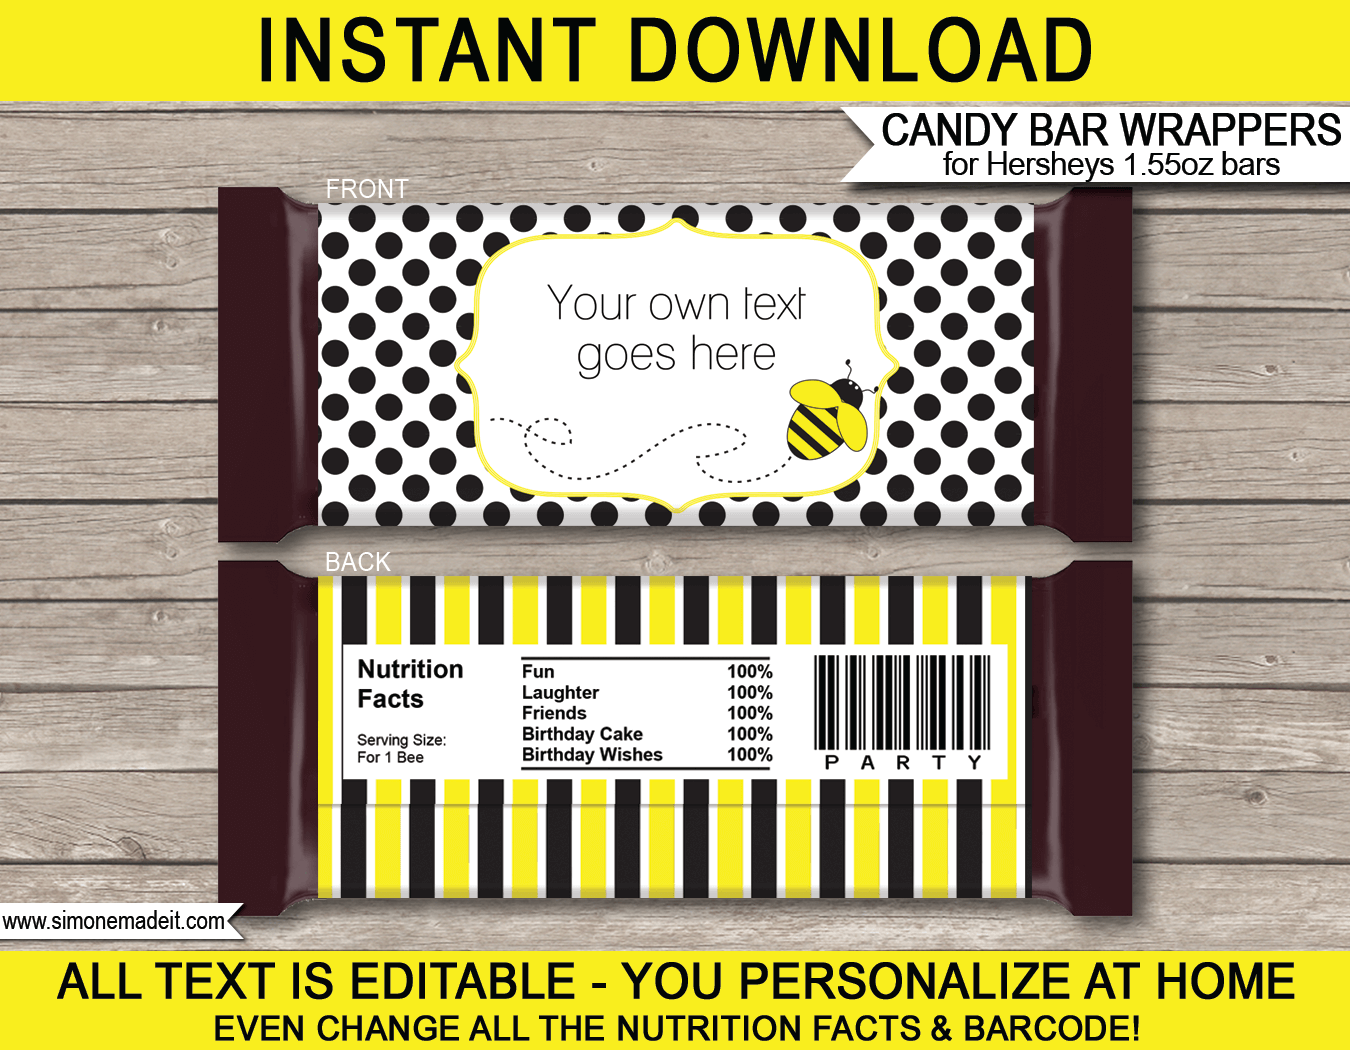 Bee Hershey Candy Bar Wrappers Personalized Candy Bars - Free Printable Birthday Candy Bar Wrappers